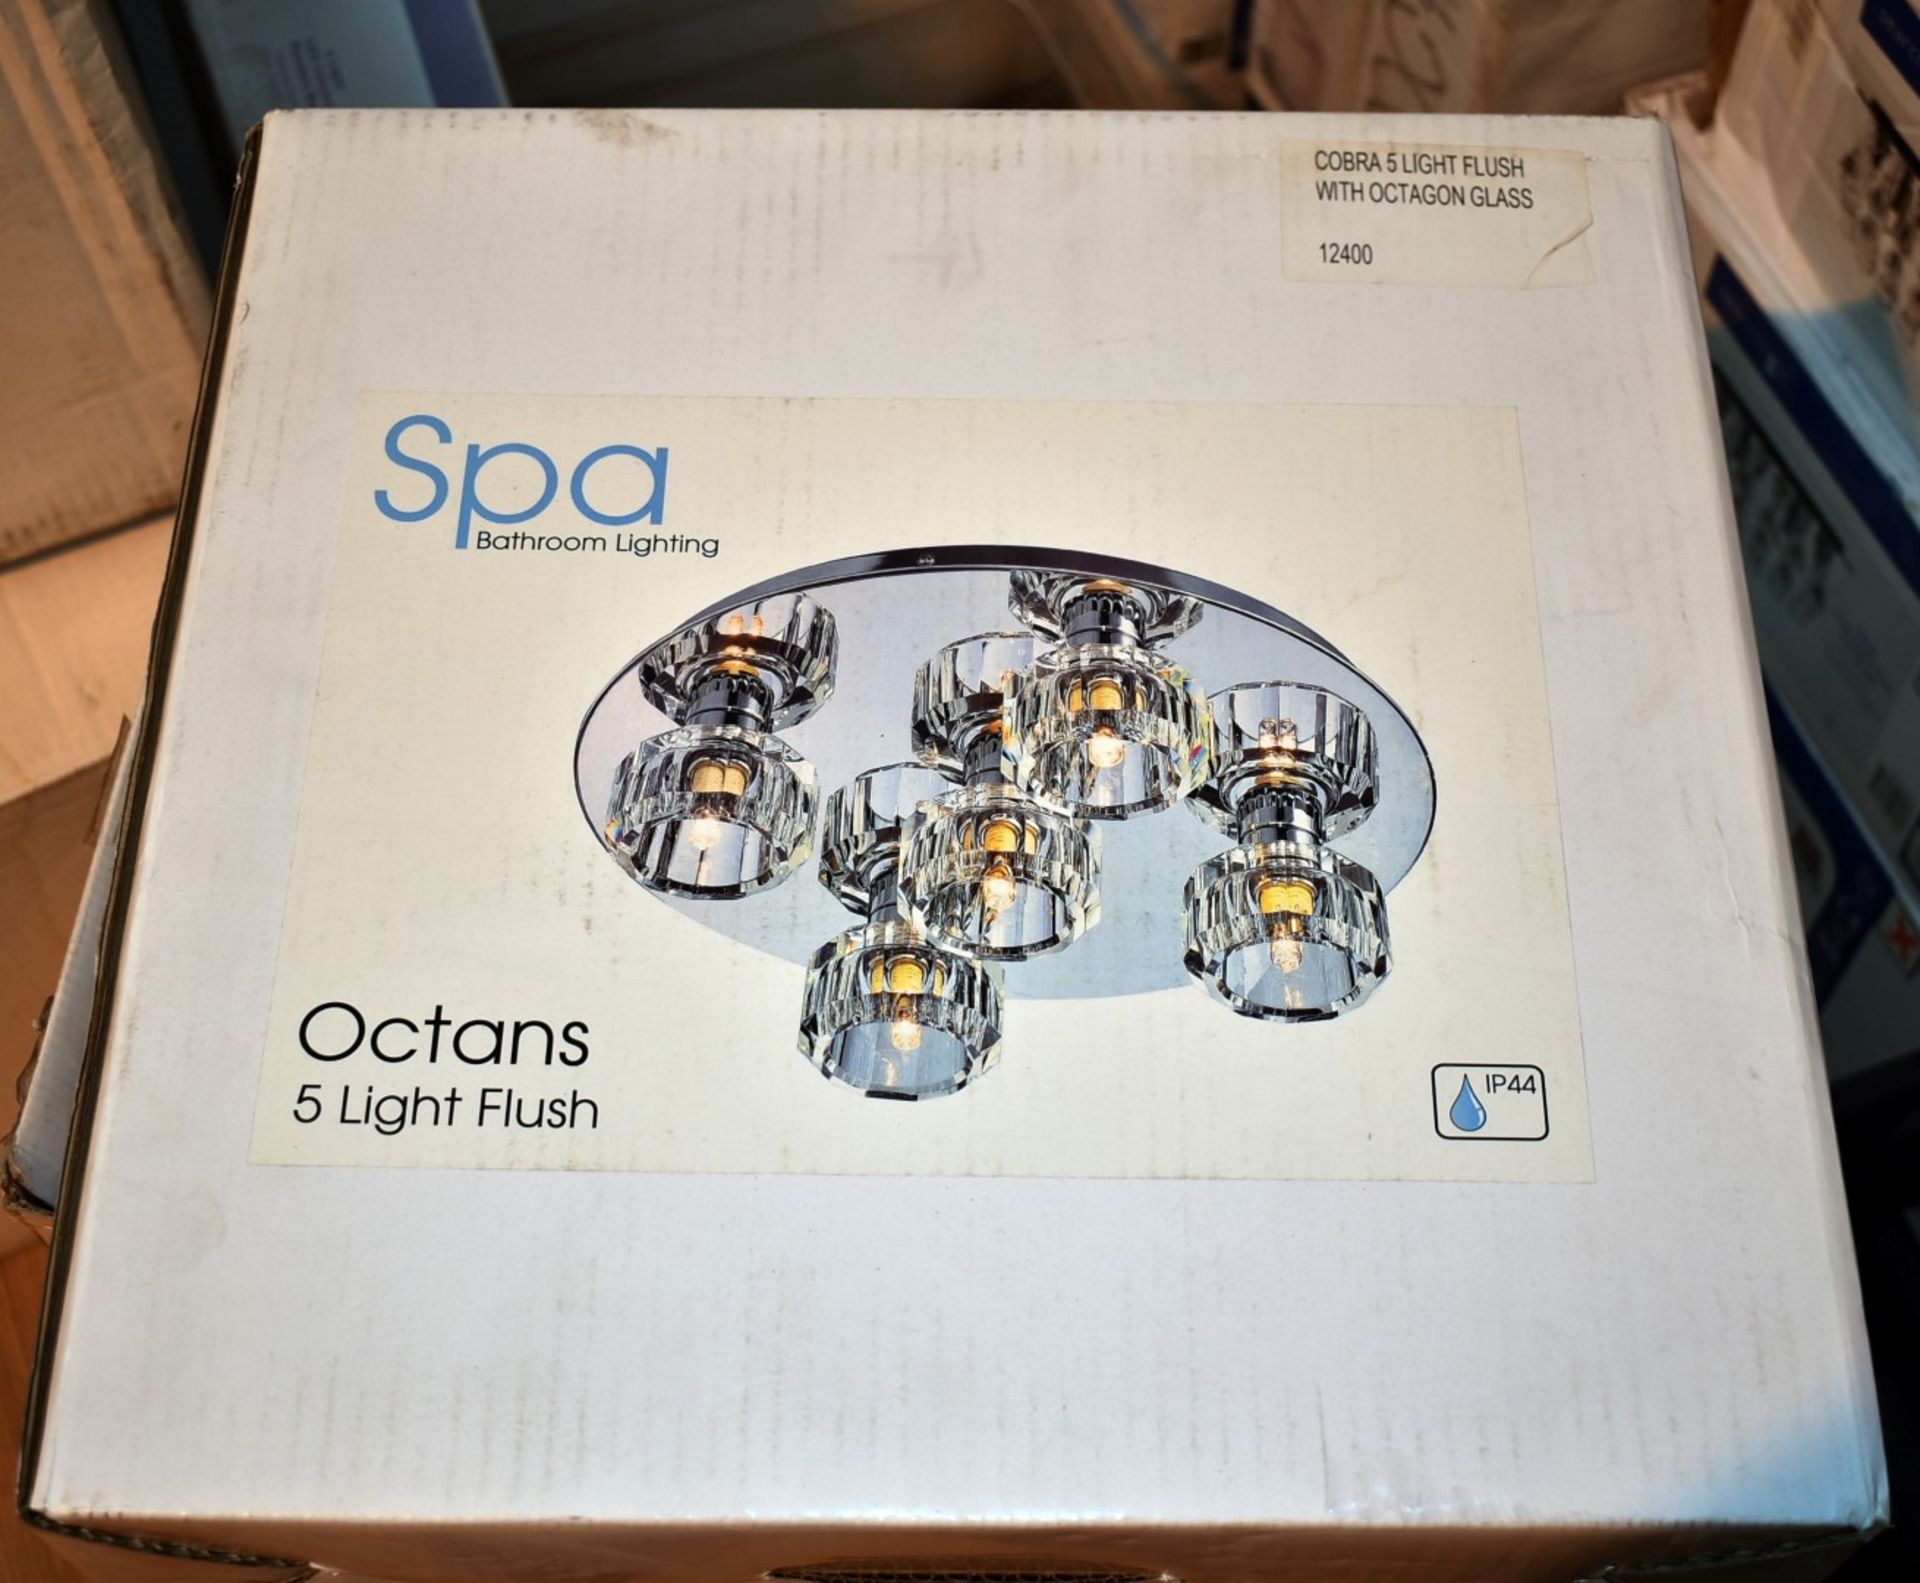 1 x Spa Bathroom Lighting - Octans 5 Light Flush Fitting With Octagon Glass Diffusers and Mirrored - Image 3 of 3